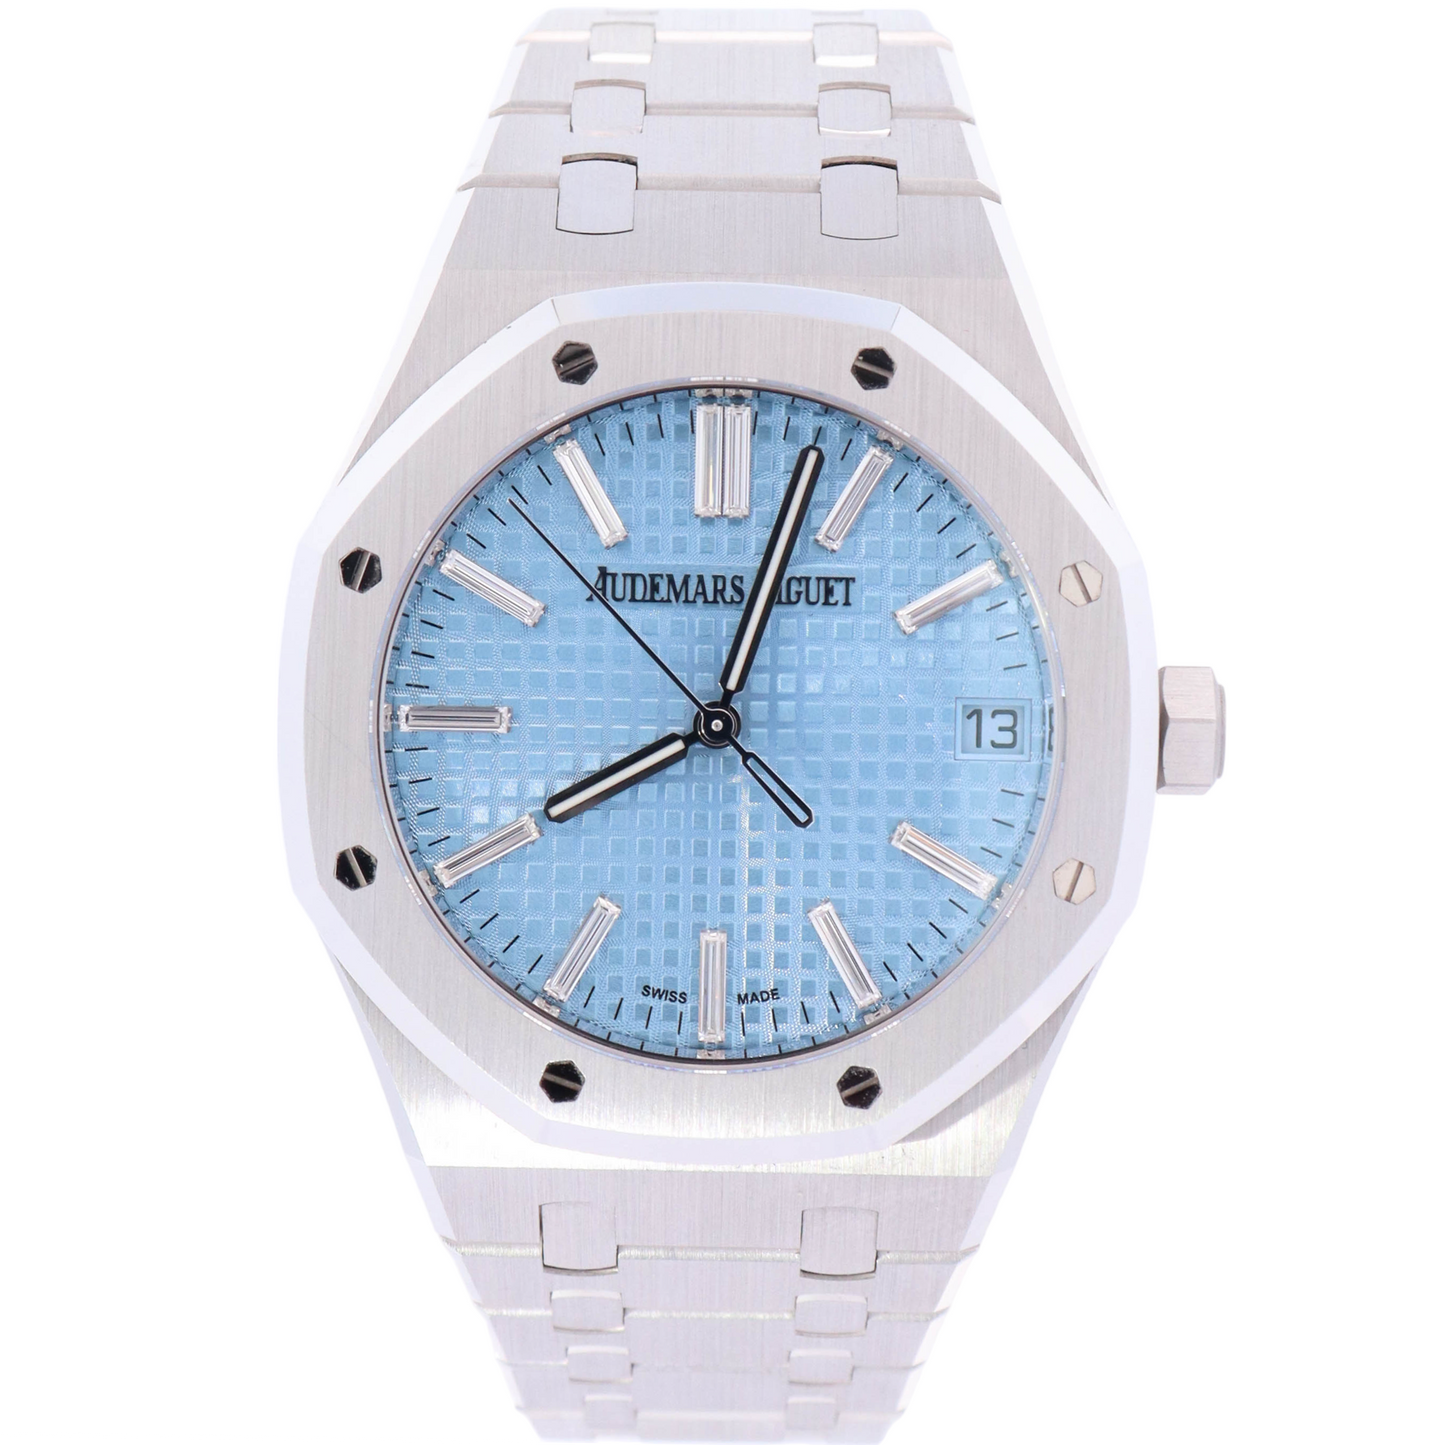 Audemars Piguet Royal Oak 41mm White Gold Light Blue Baguette Dial Watch Reference# 15510BC.OO.1320BC.01 - Happy Jewelers Fine Jewelry Lifetime Warranty